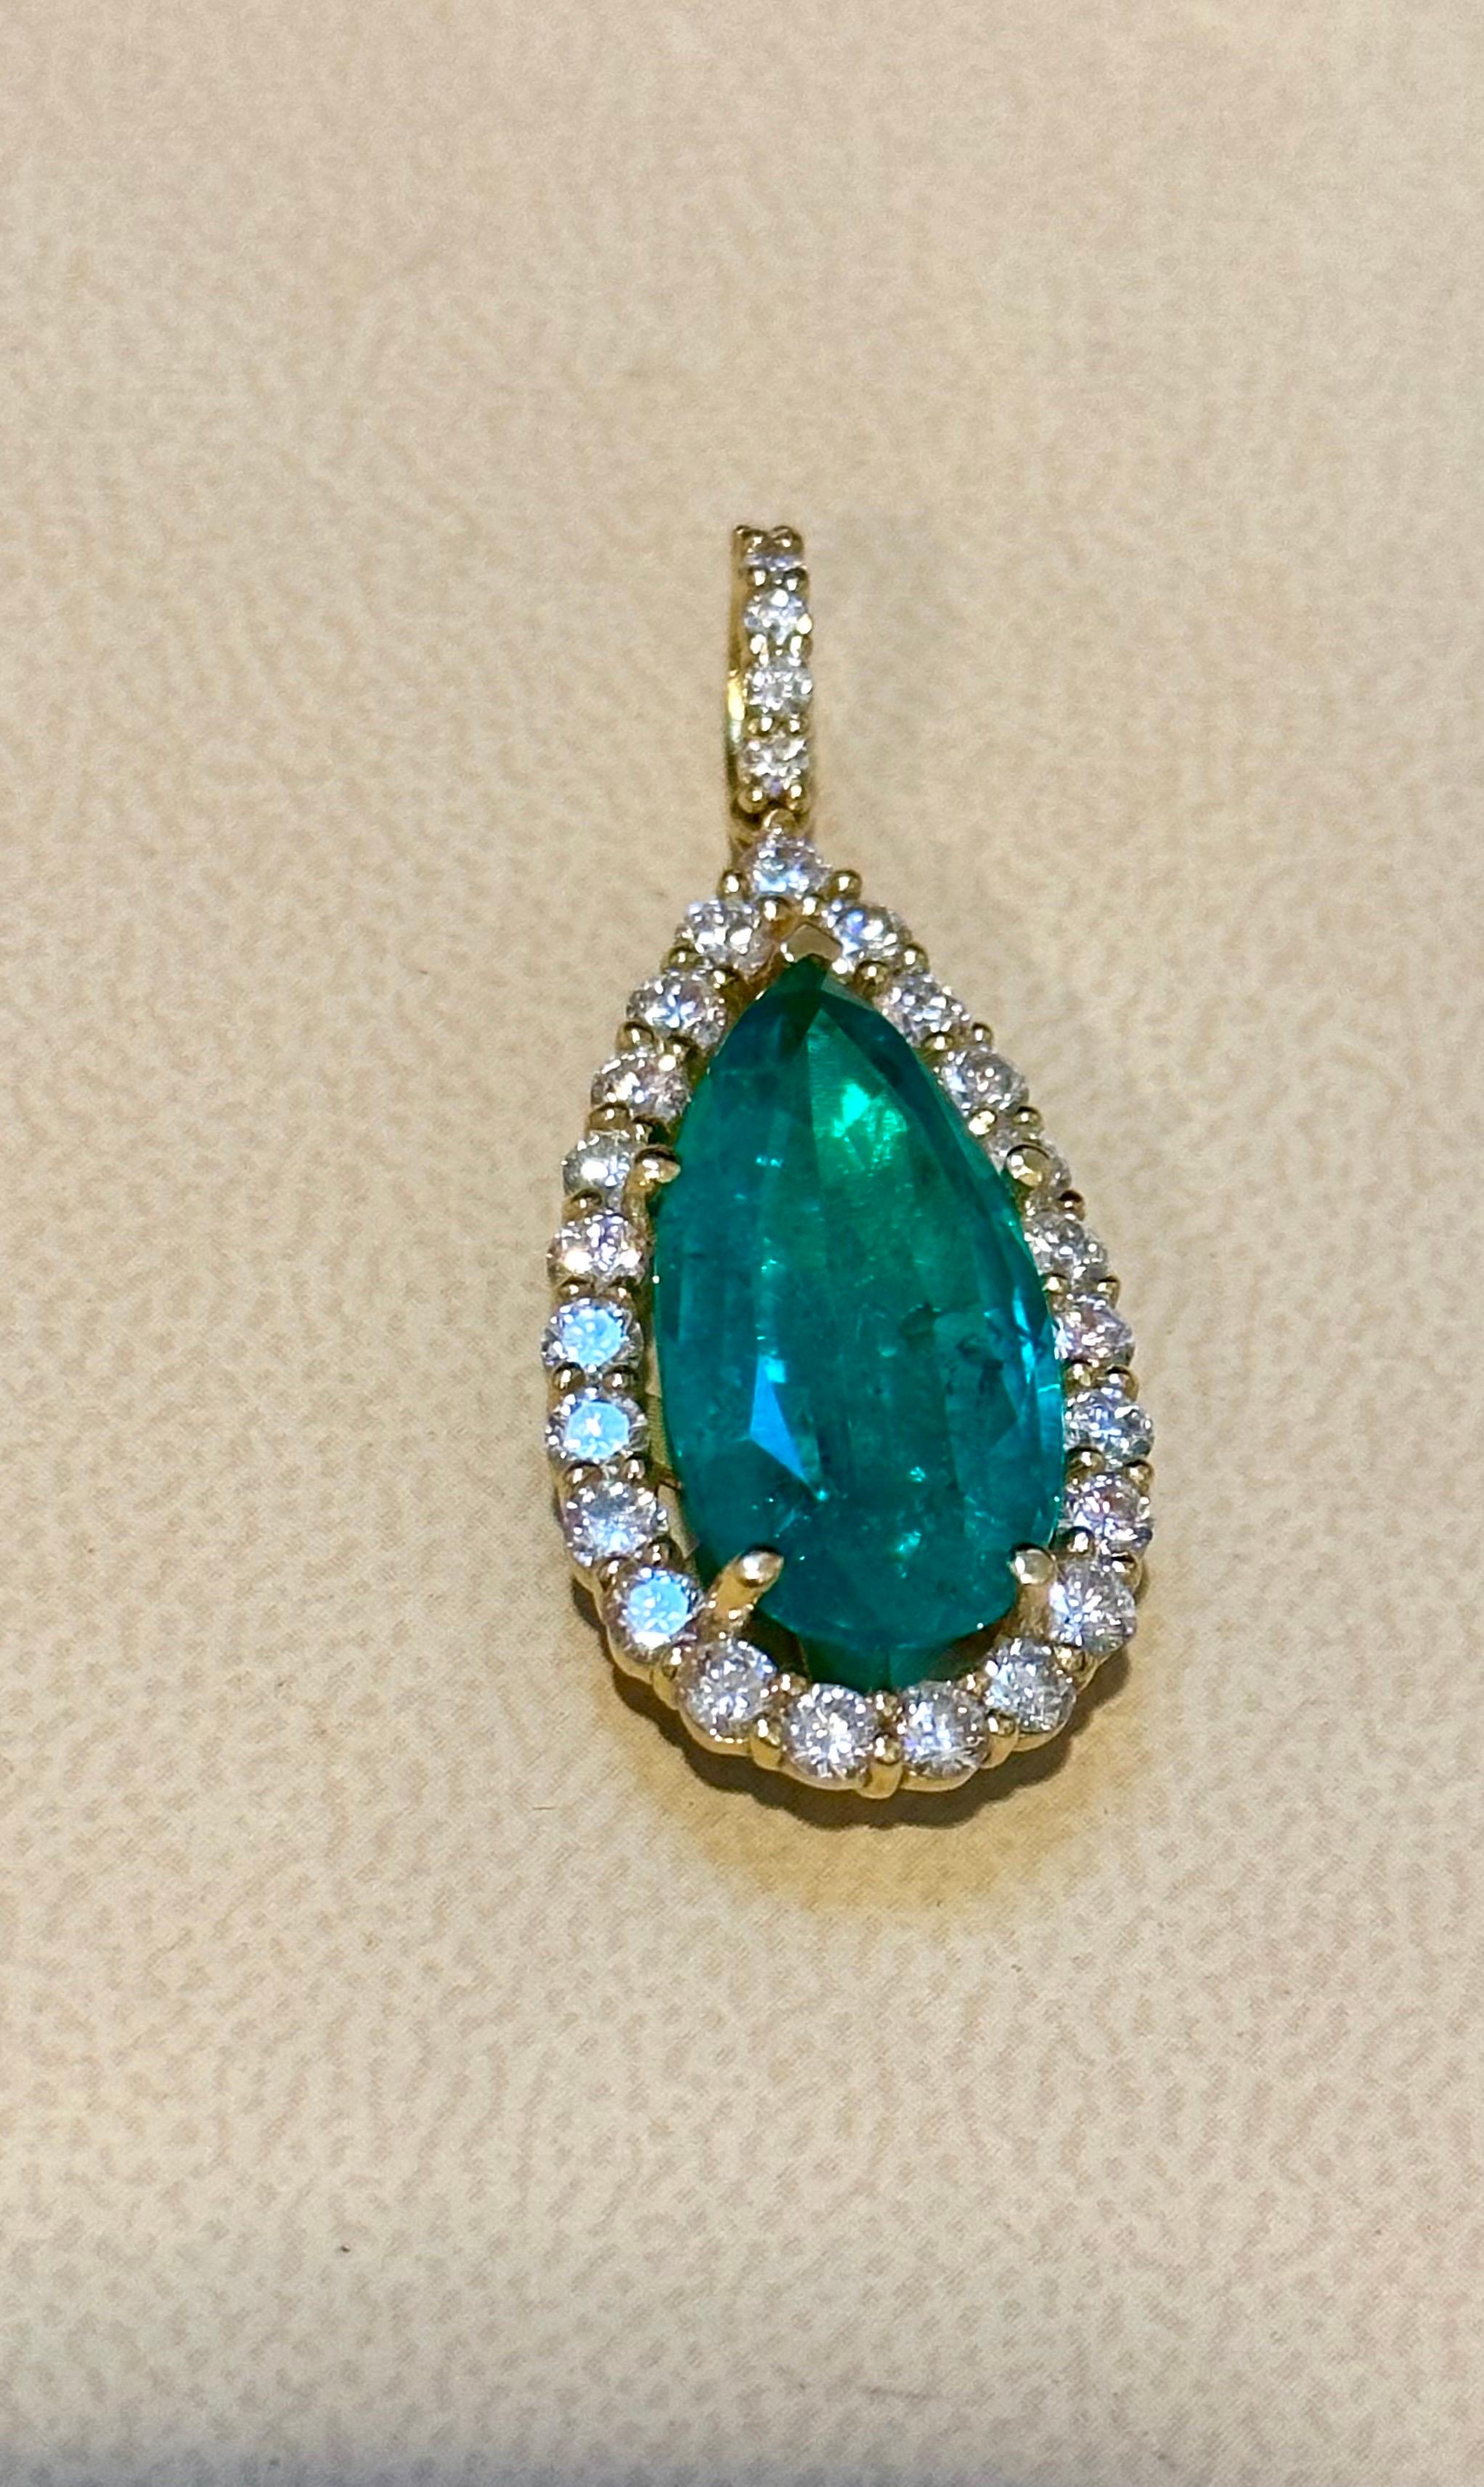 11 Carat Pear Shape Colombian Emerald and Diamond Pendant Necklace Enhancer In Excellent Condition For Sale In New York, NY